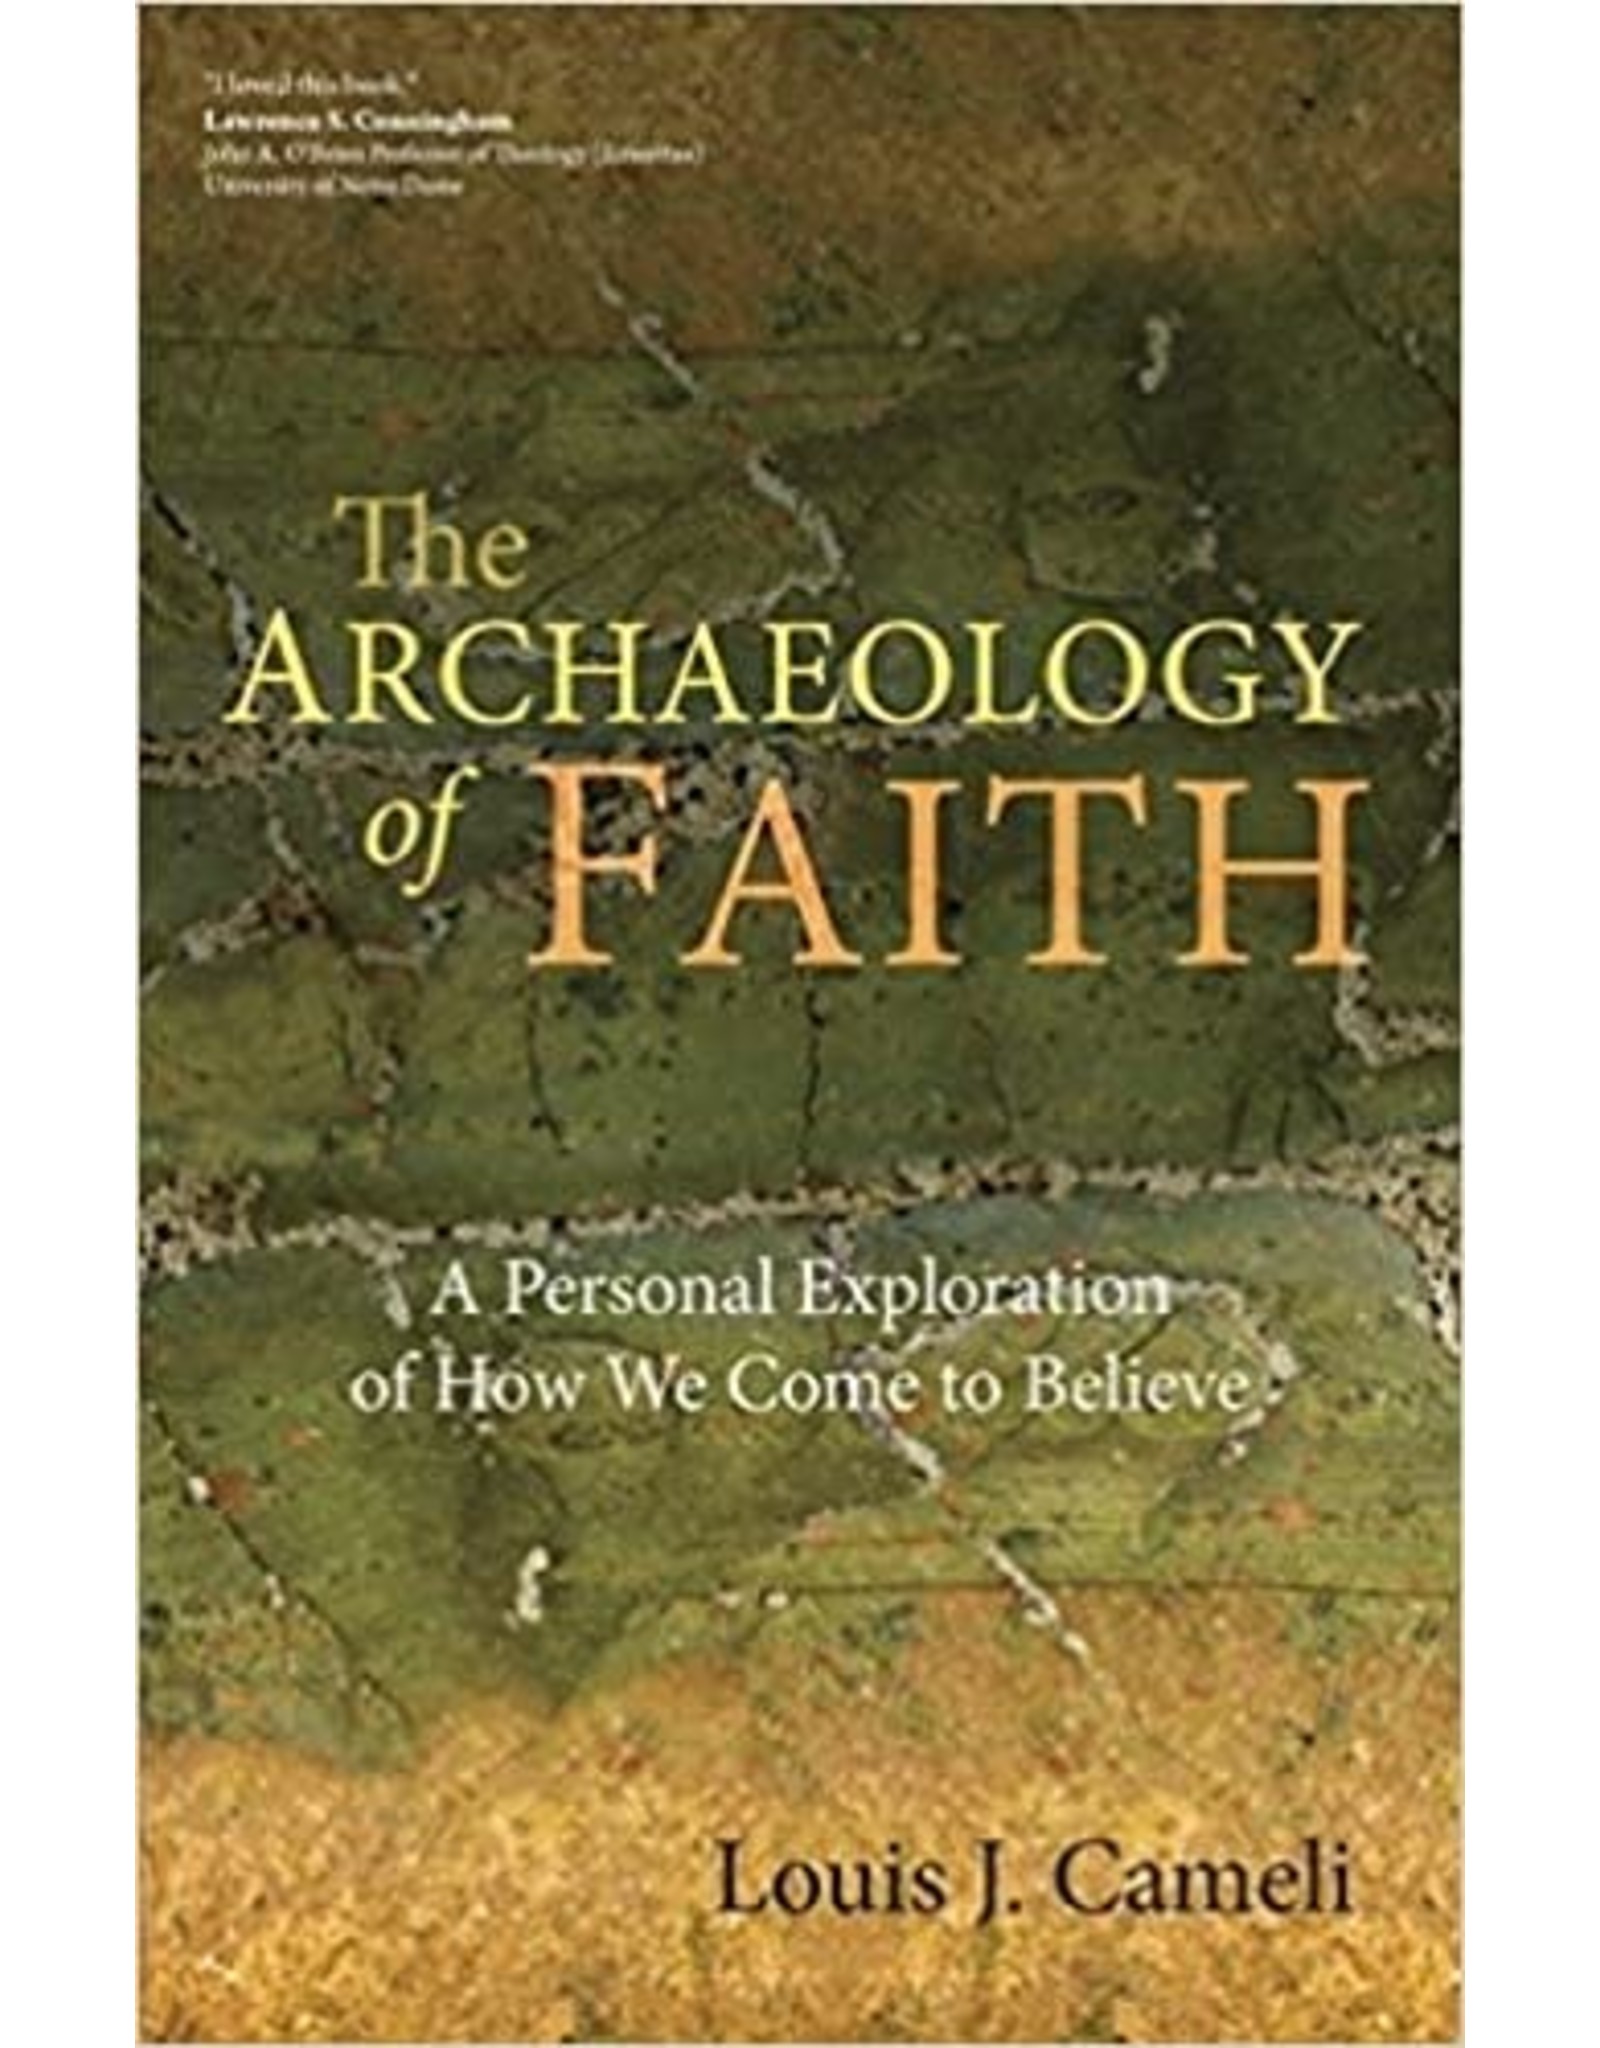 The Archaeology of Faith: A Personal Exploration of How We Come to Believe